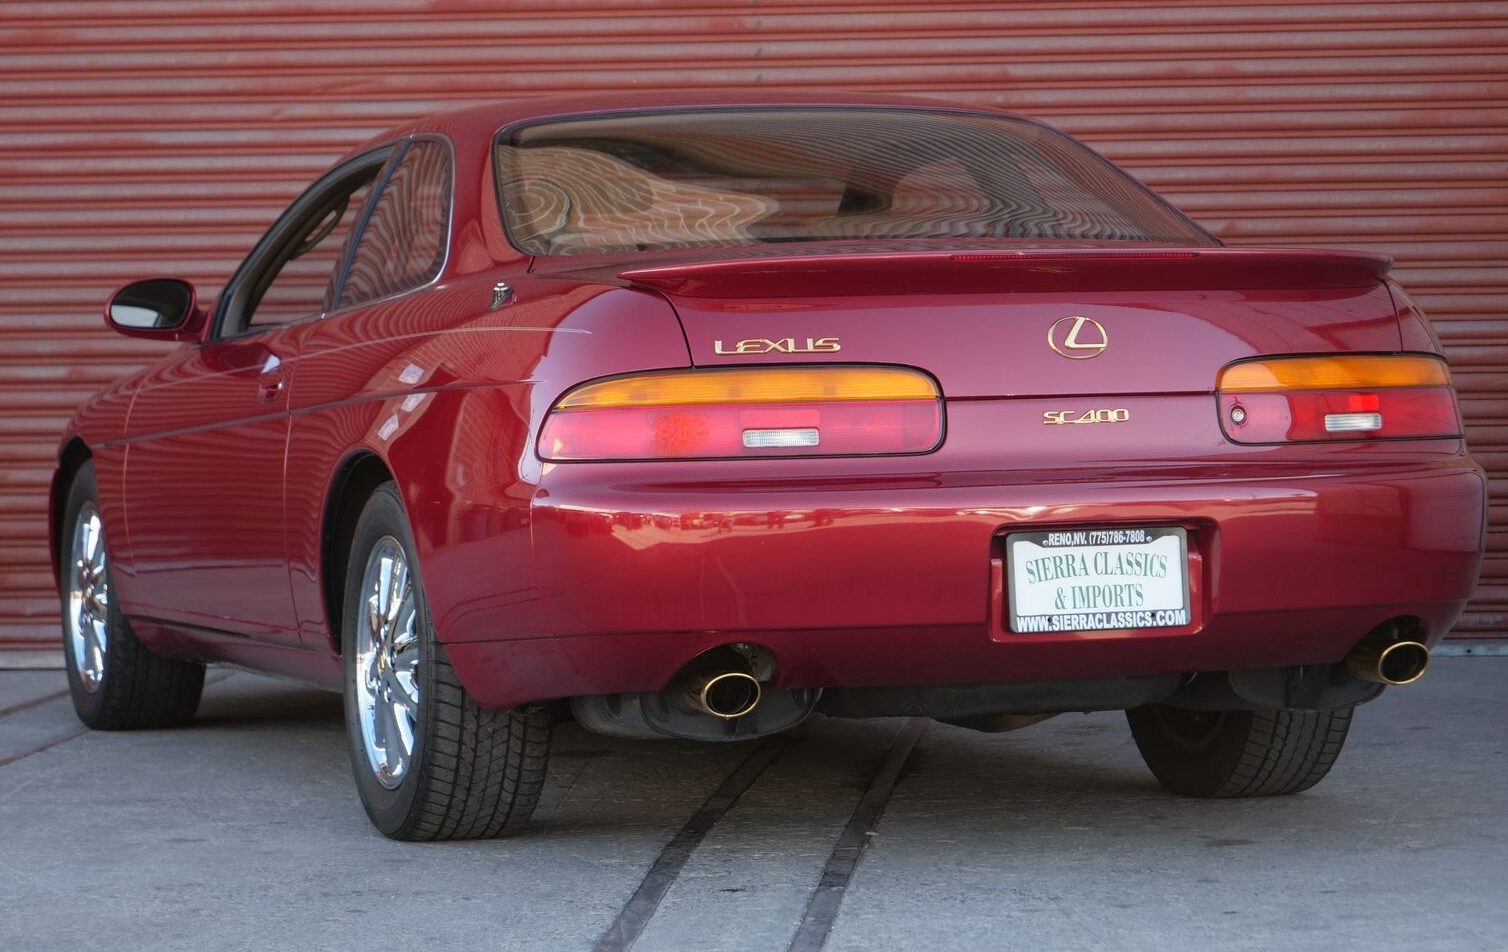 One-Owner 1992 Lexus SC 400 Has A Lot Going For It | Carscoops